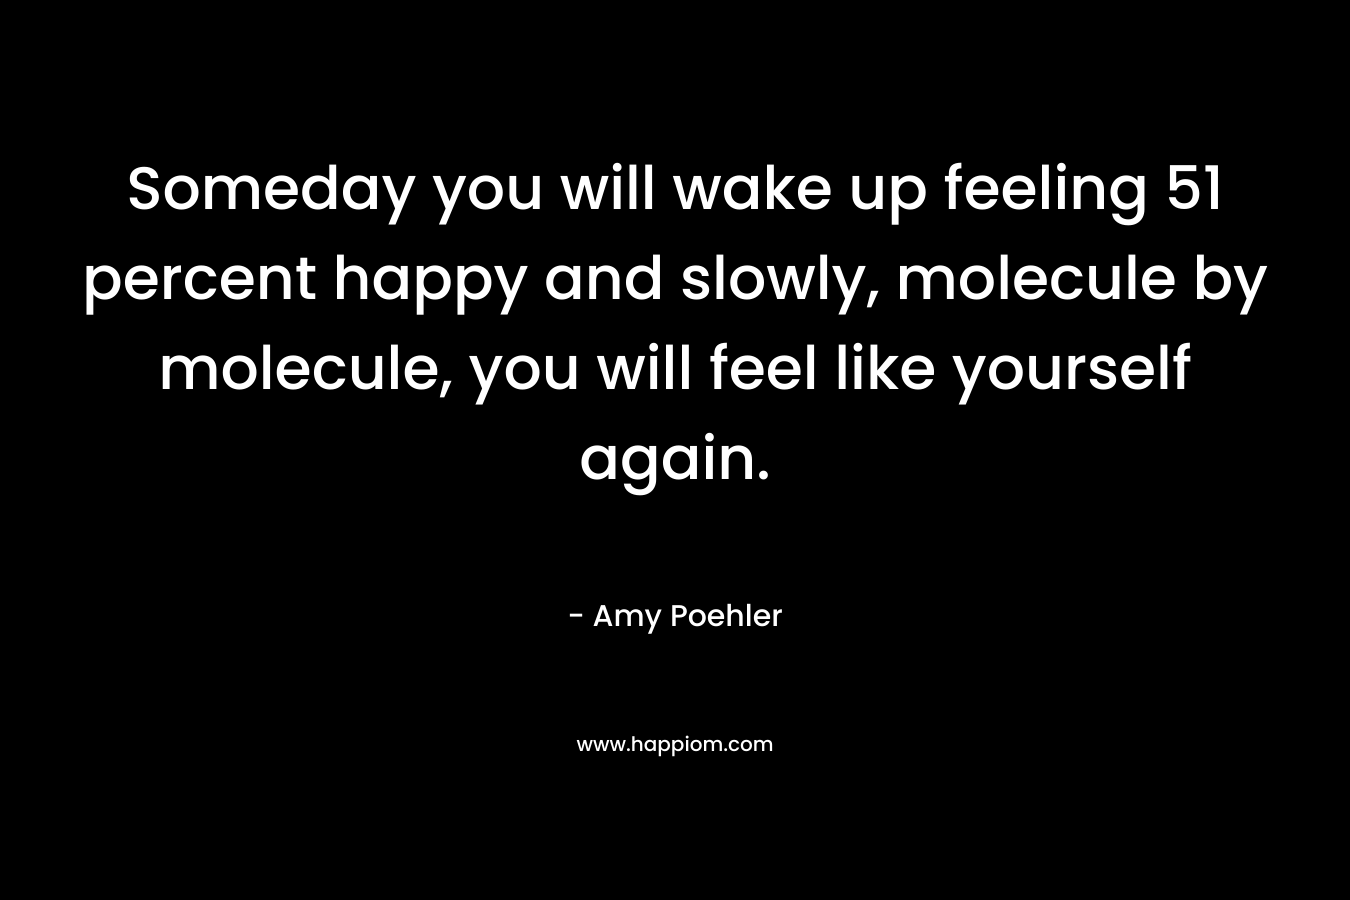 Someday you will wake up feeling 51 percent happy and slowly, molecule by molecule, you will feel like yourself again. – Amy Poehler